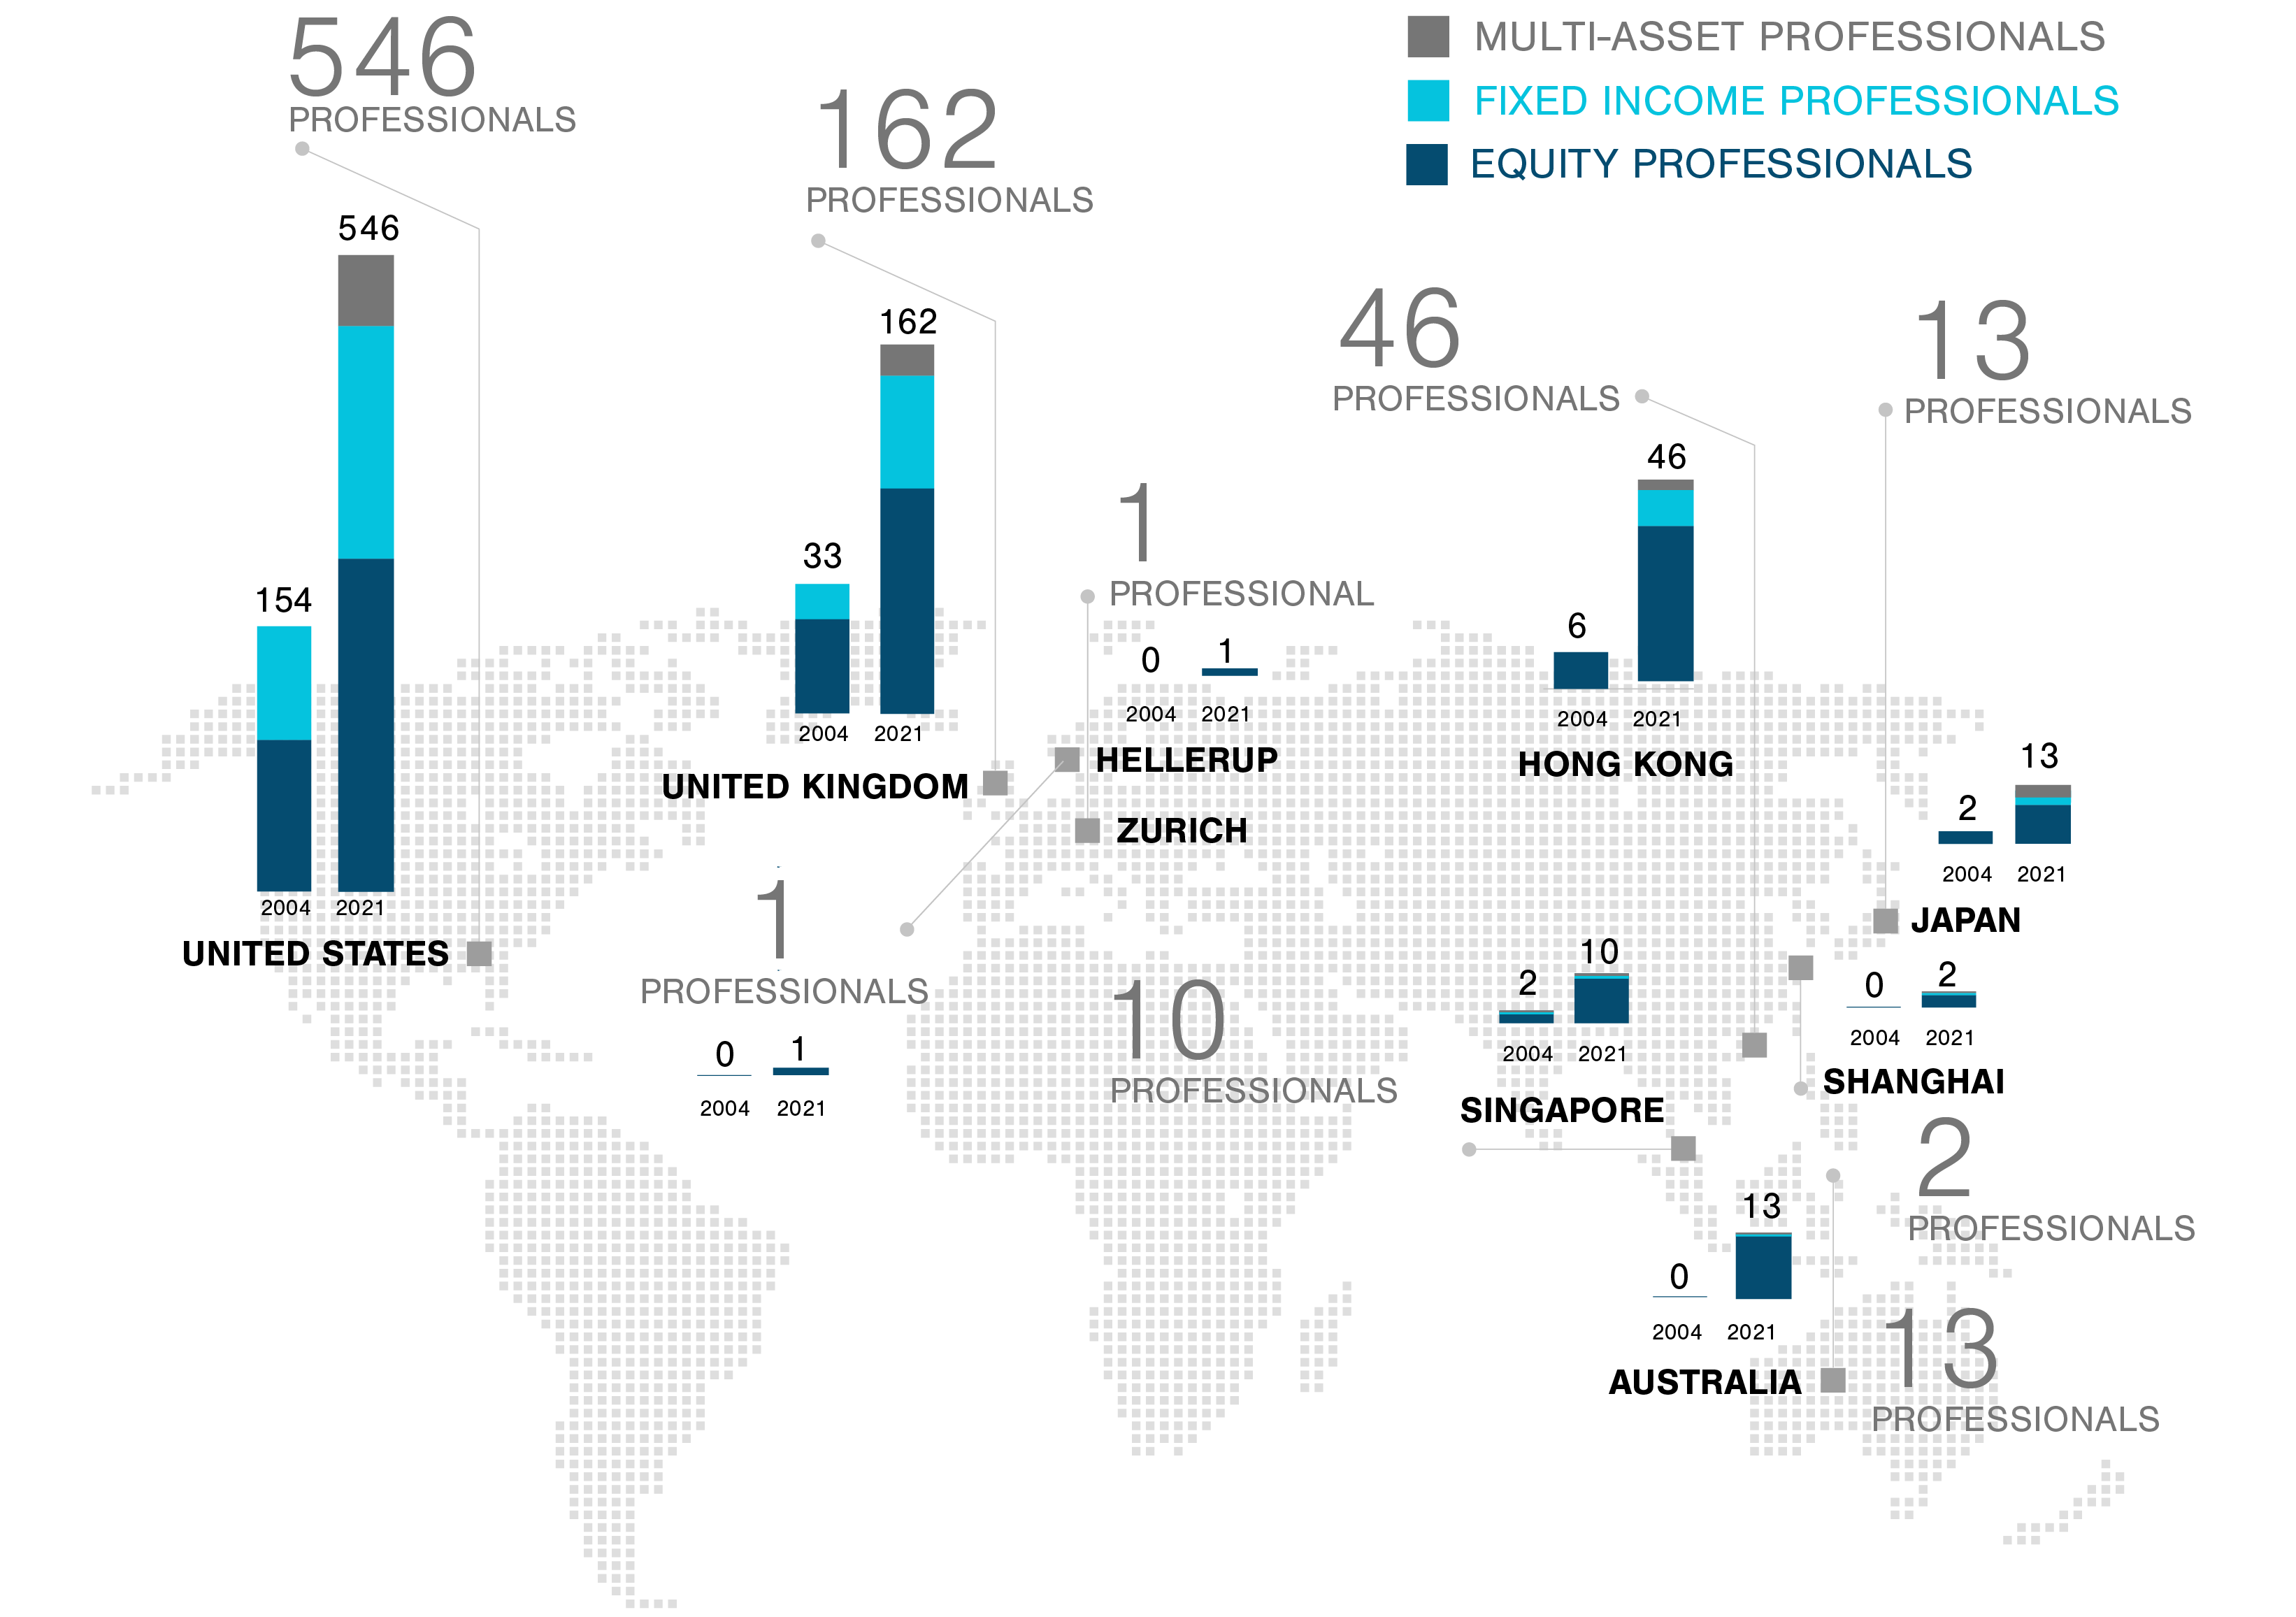 Infographic showing the 2020 number of T. Rowe Price multi-asset, fixed income and equity professionals, including growth since 2004, in each region. Also shows the Asset Under Management amounts of key asset classes